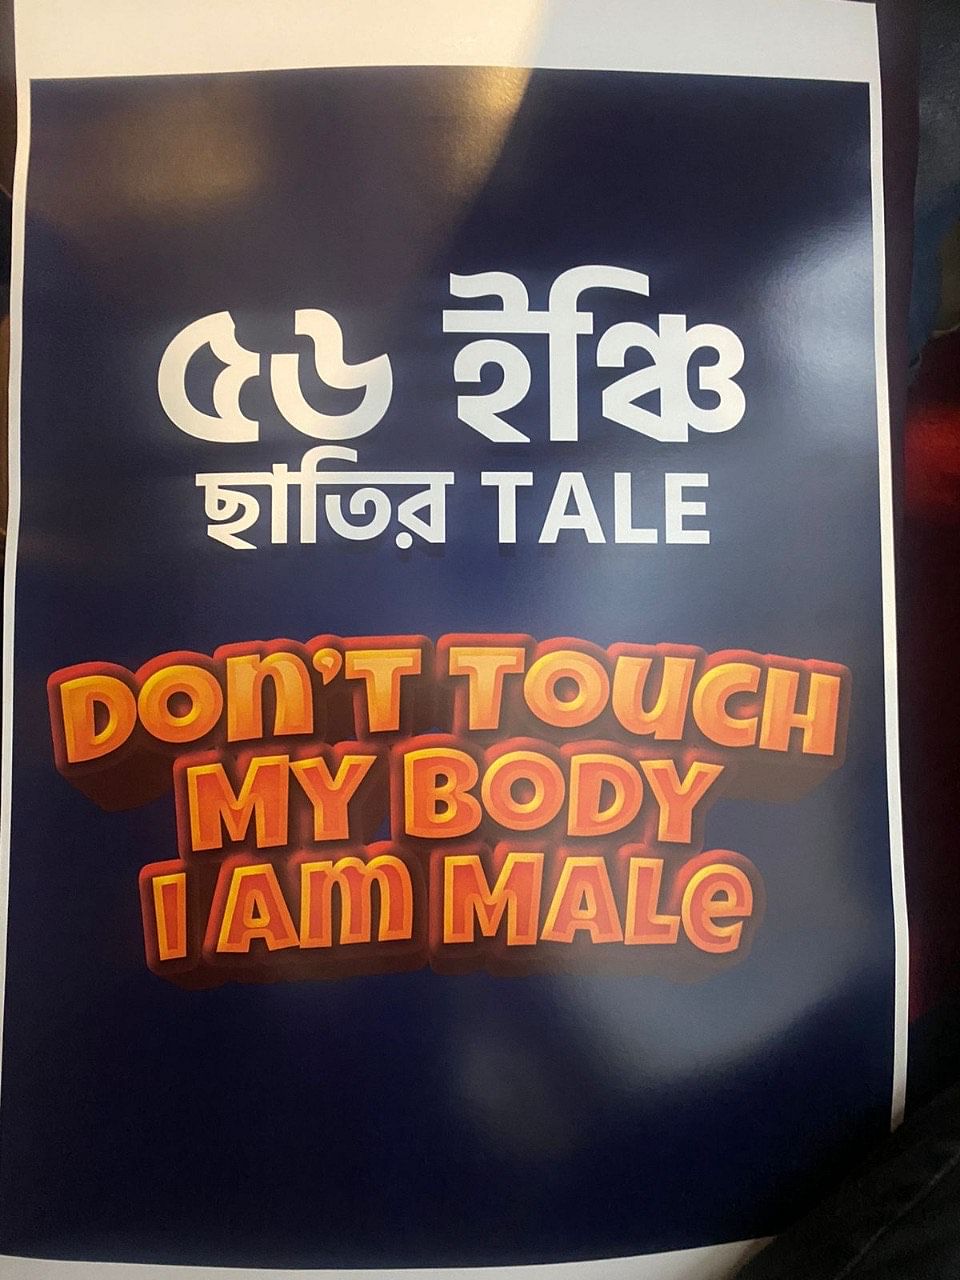 Addressing a female police officer, Adhikari had purportedly said, 'Don't touch my body. You are a lady, I am male.'